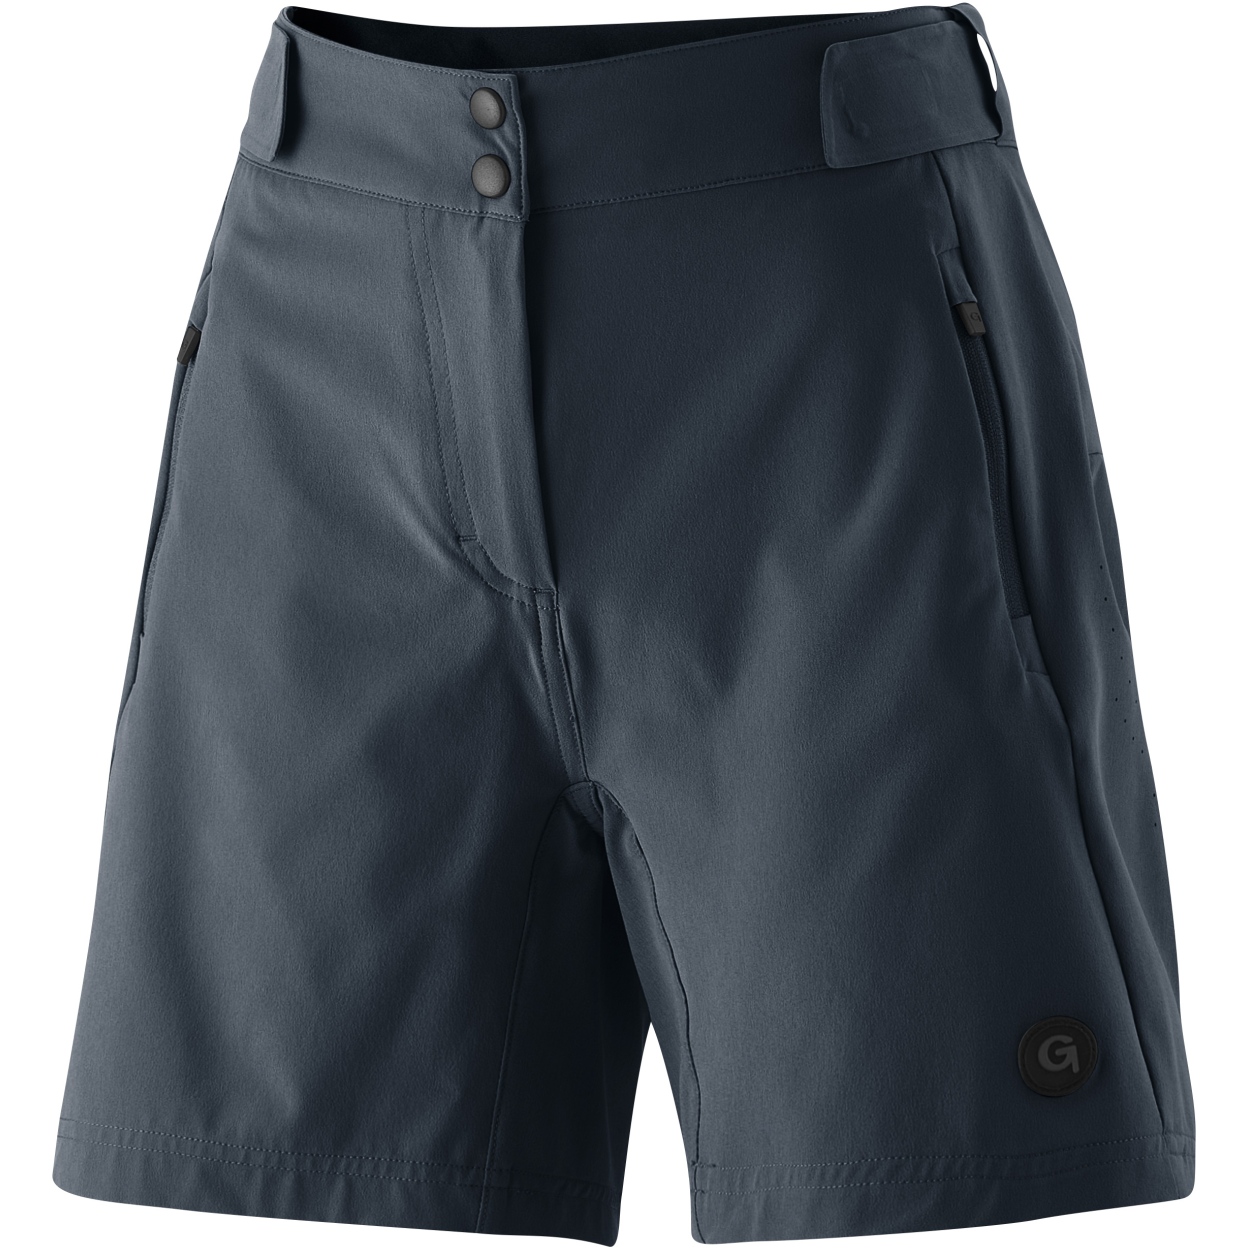 Productfoto van Gonso Igna 2.0 Fietsshort Dames - Outerspace